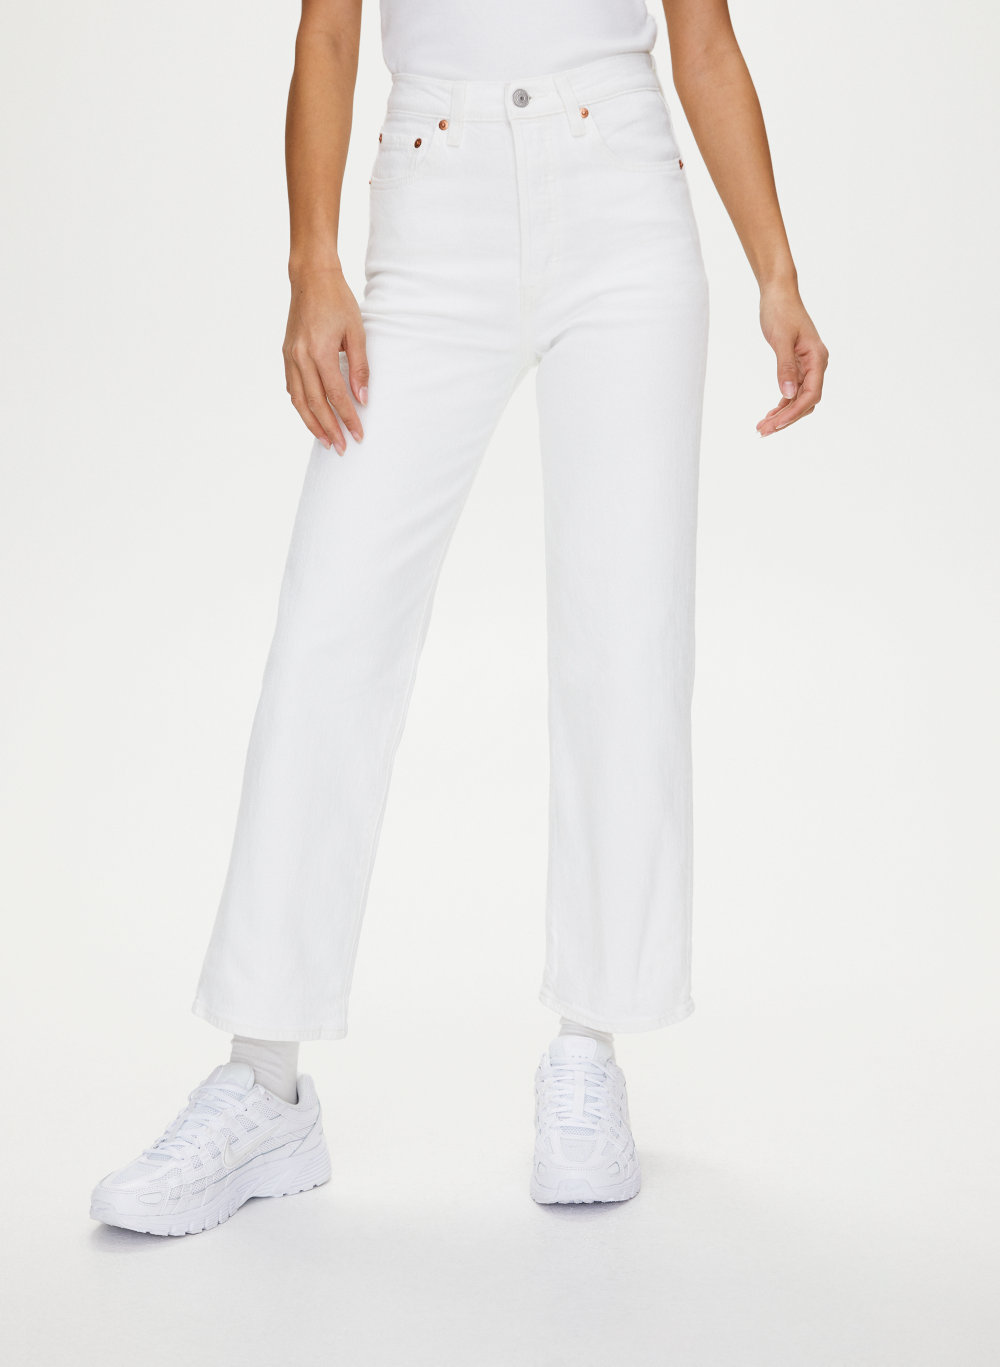 mr price chinos for menLimited Special Sales and Special Offers – Women ...